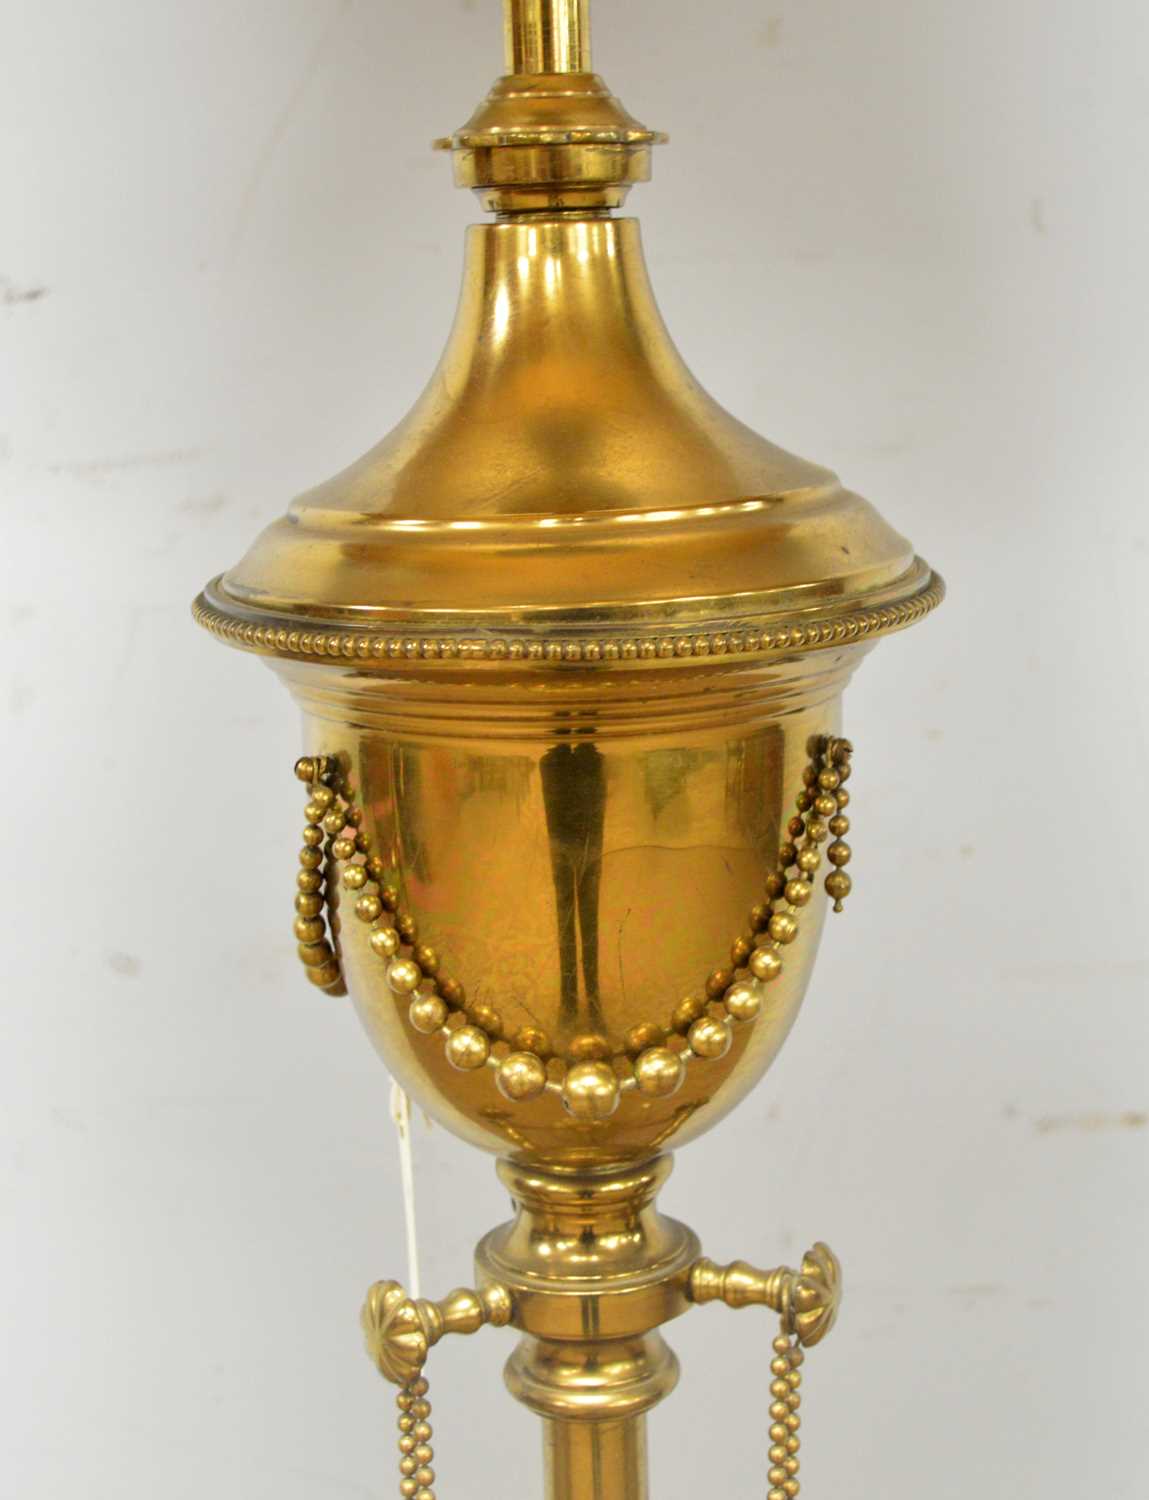 A classical style brass lamp standard - Image 3 of 3